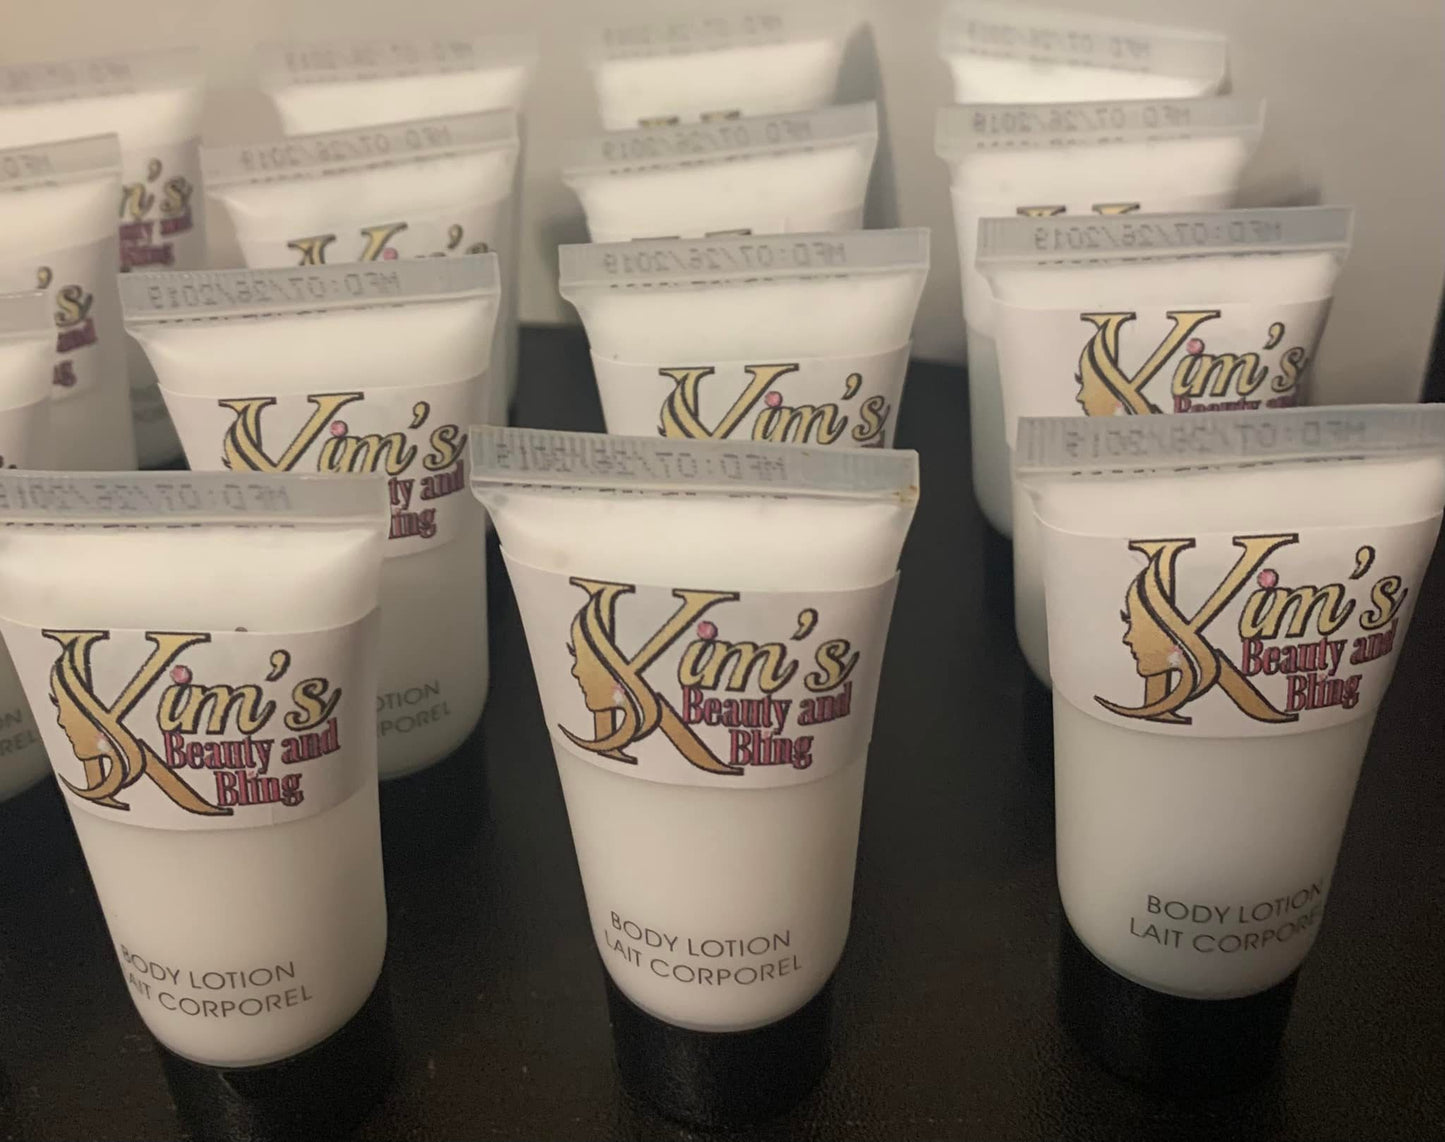 Bing .75 hand lotion - Personalized or Generic